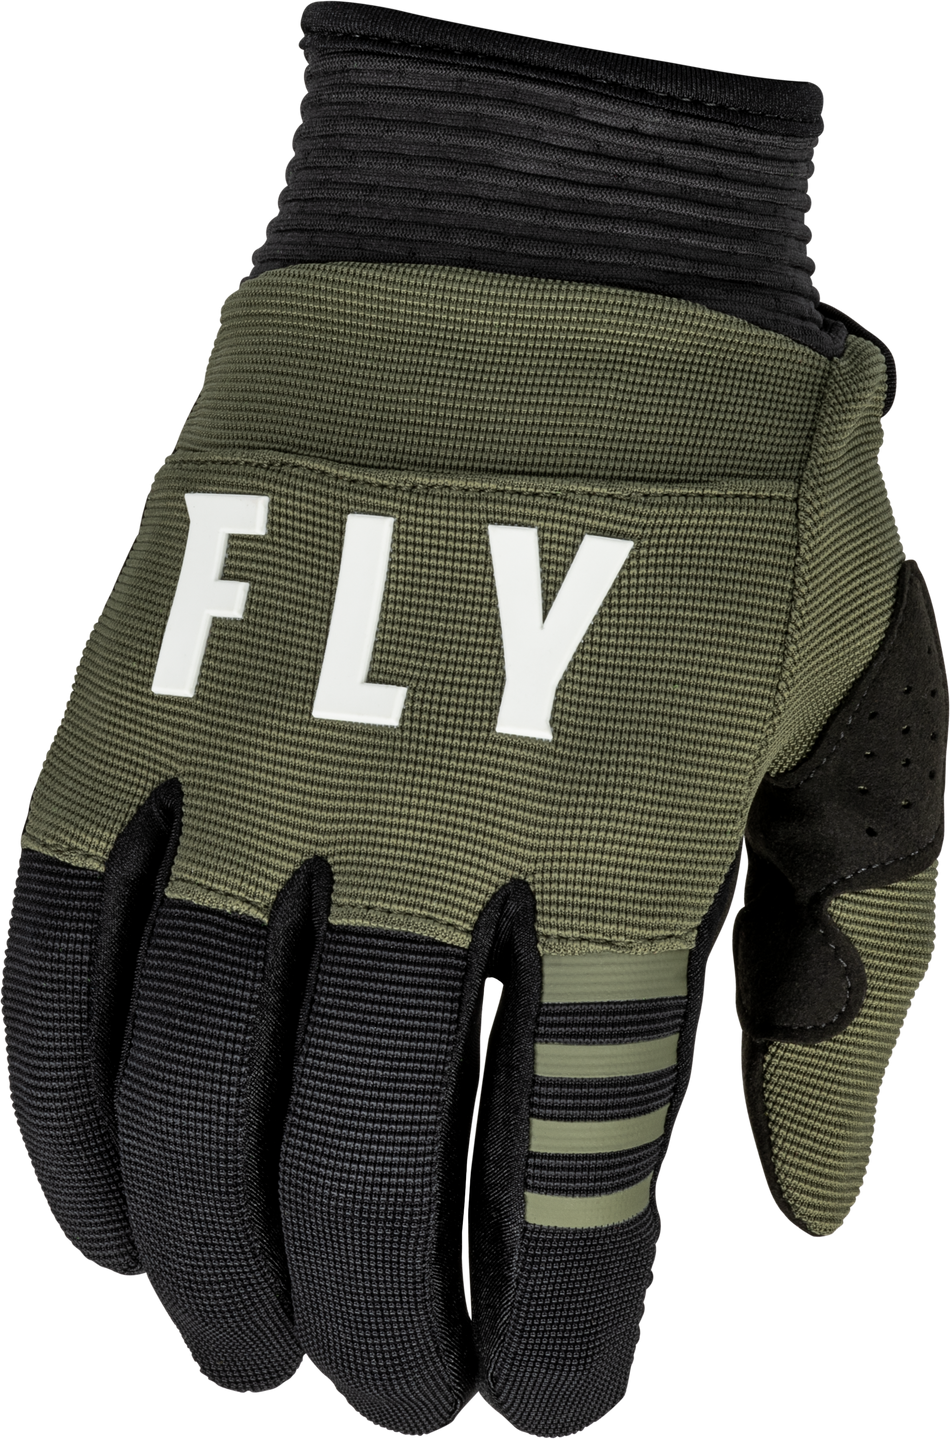 FLY RACING F-16 Gloves Olive Green/Black 2x 376-9132X